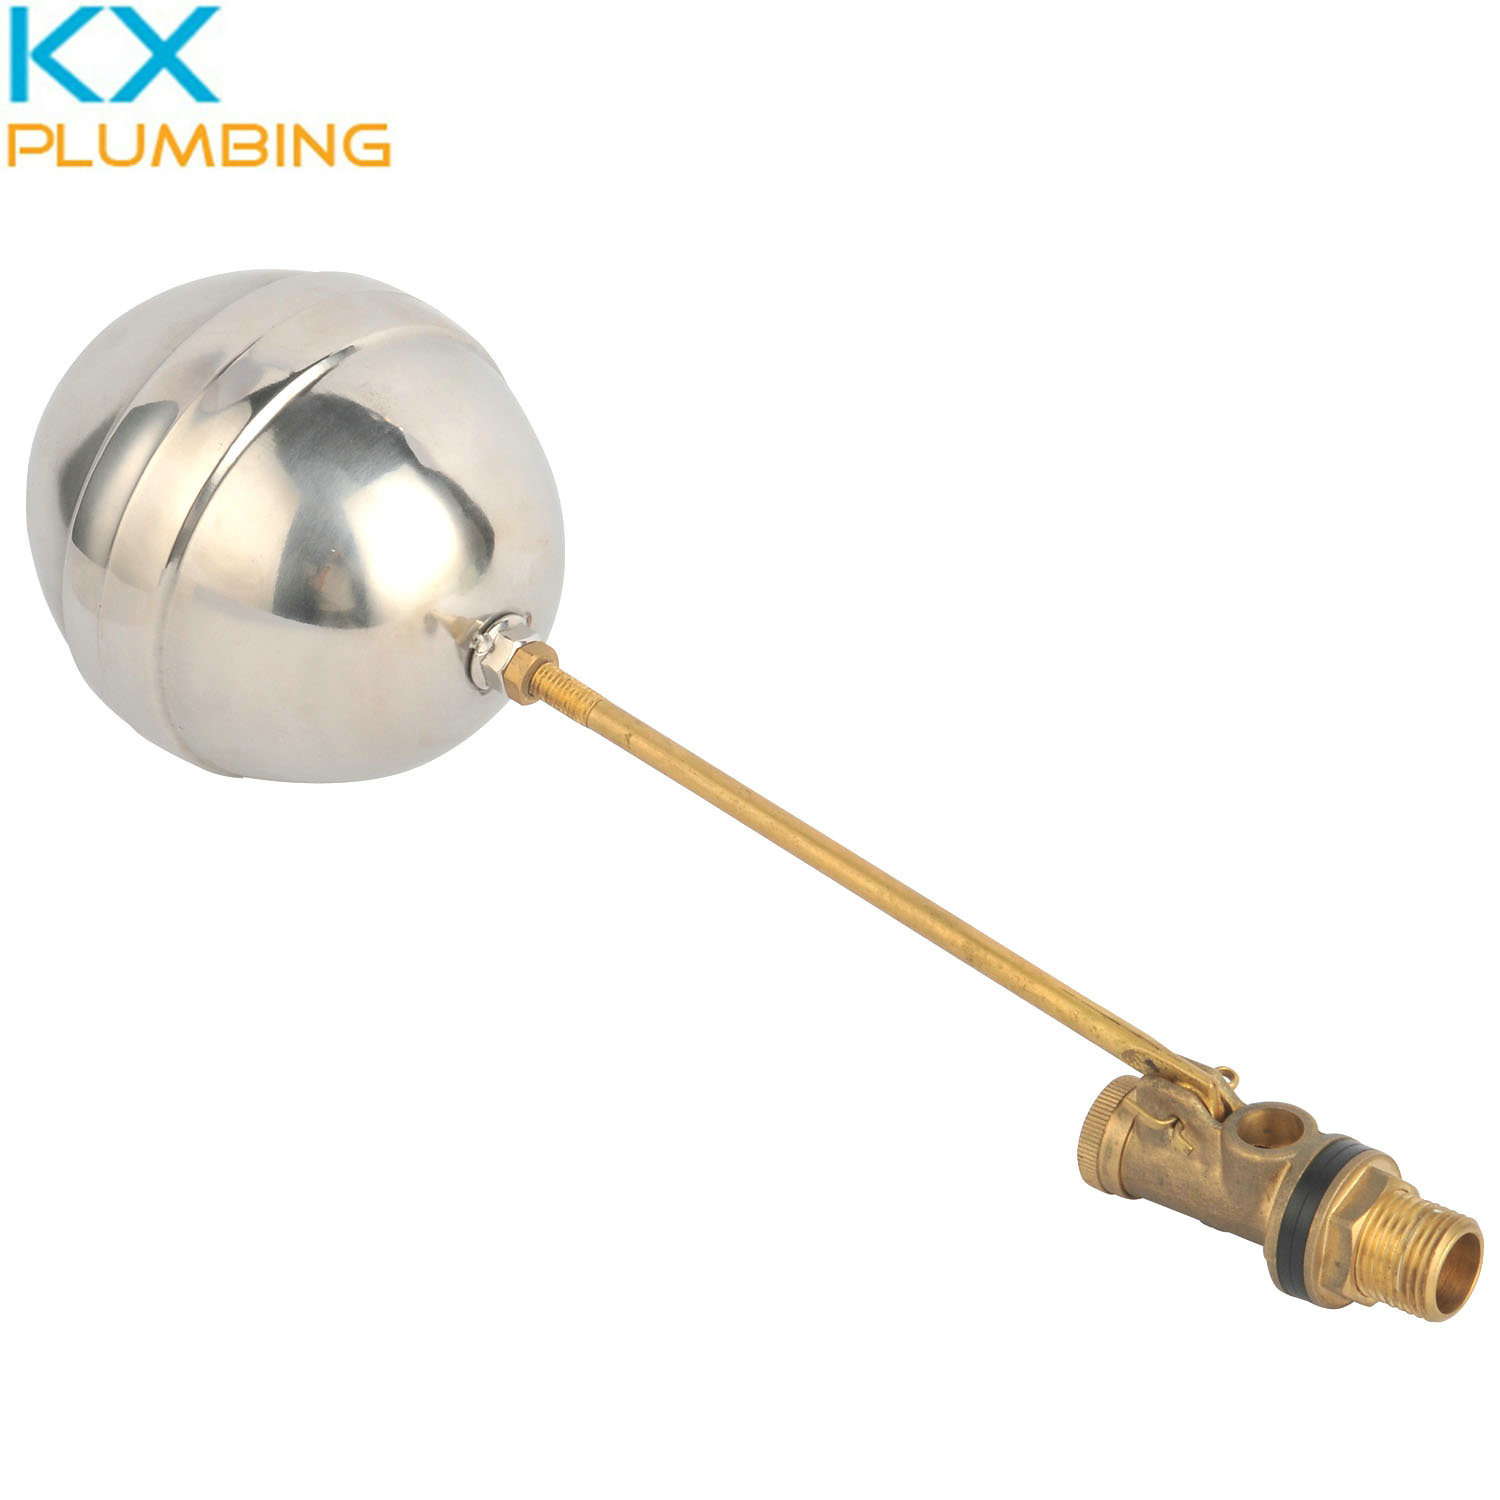 Float Valve with Stainless Steel Ball (KX-FV001)